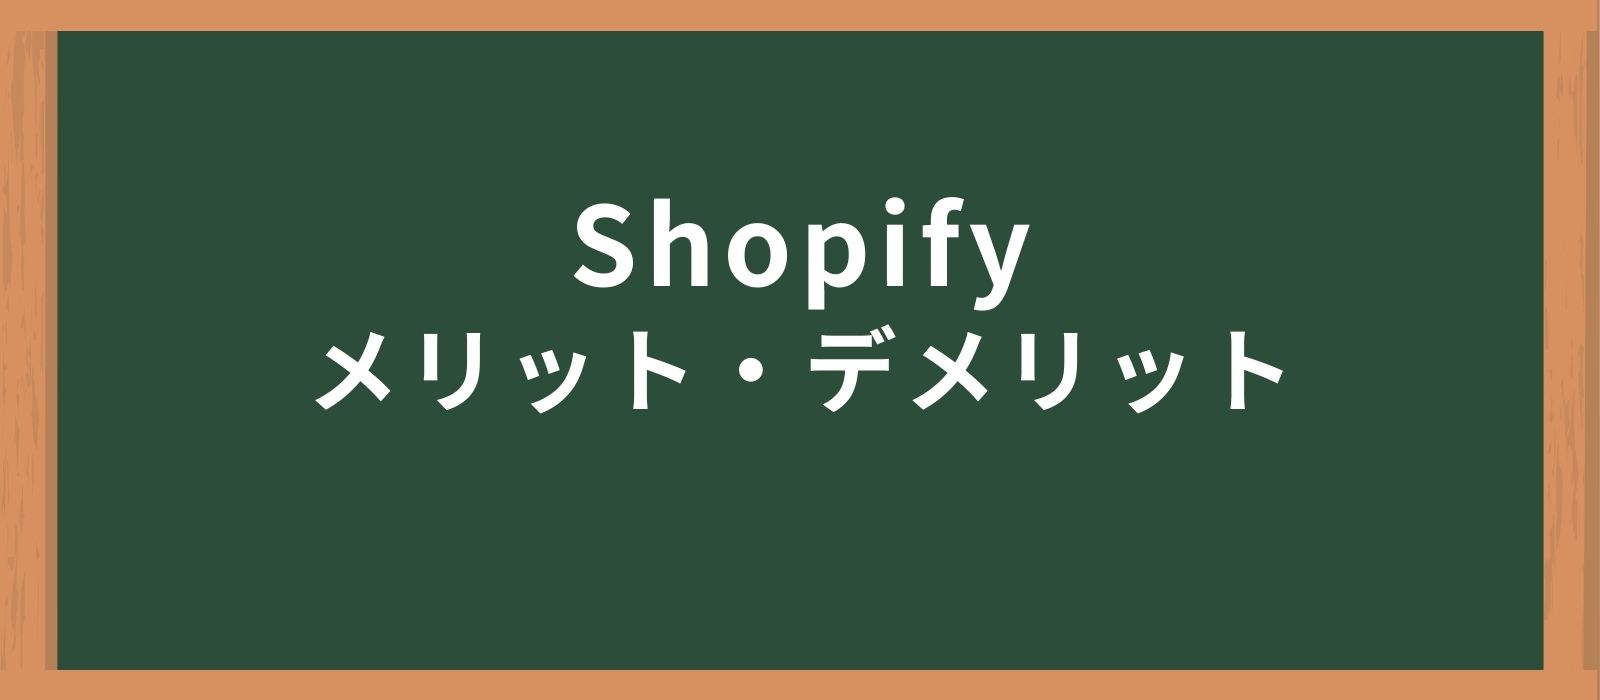 Shopifyのメリット・デメリット